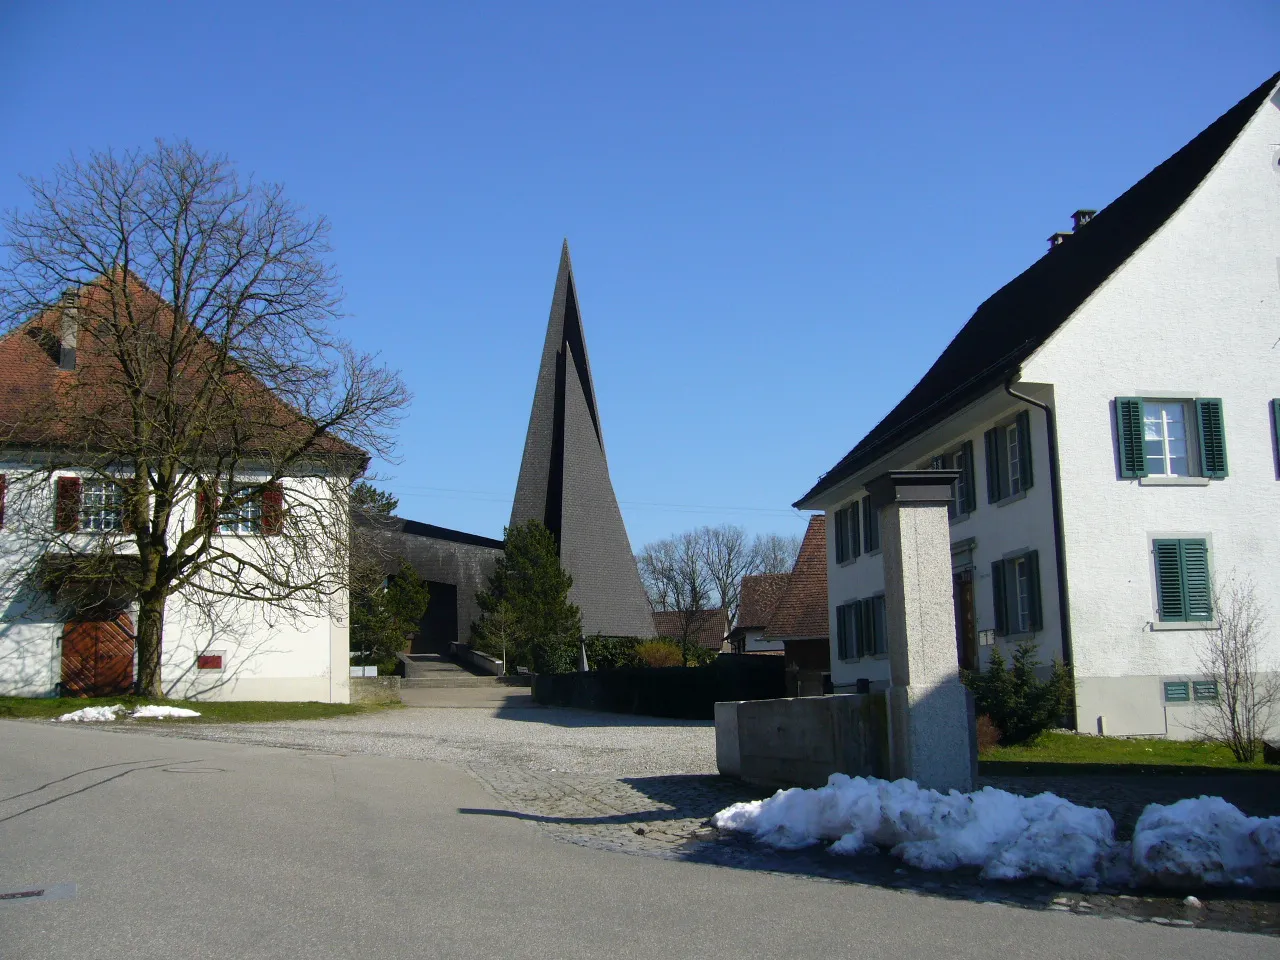 Photo showing: Roman Catholic church and rectory (left) in the village of Hüttwilen, canton Thurgau, Switzerland. Picture taken by Peter Berger, March 26, 2007.